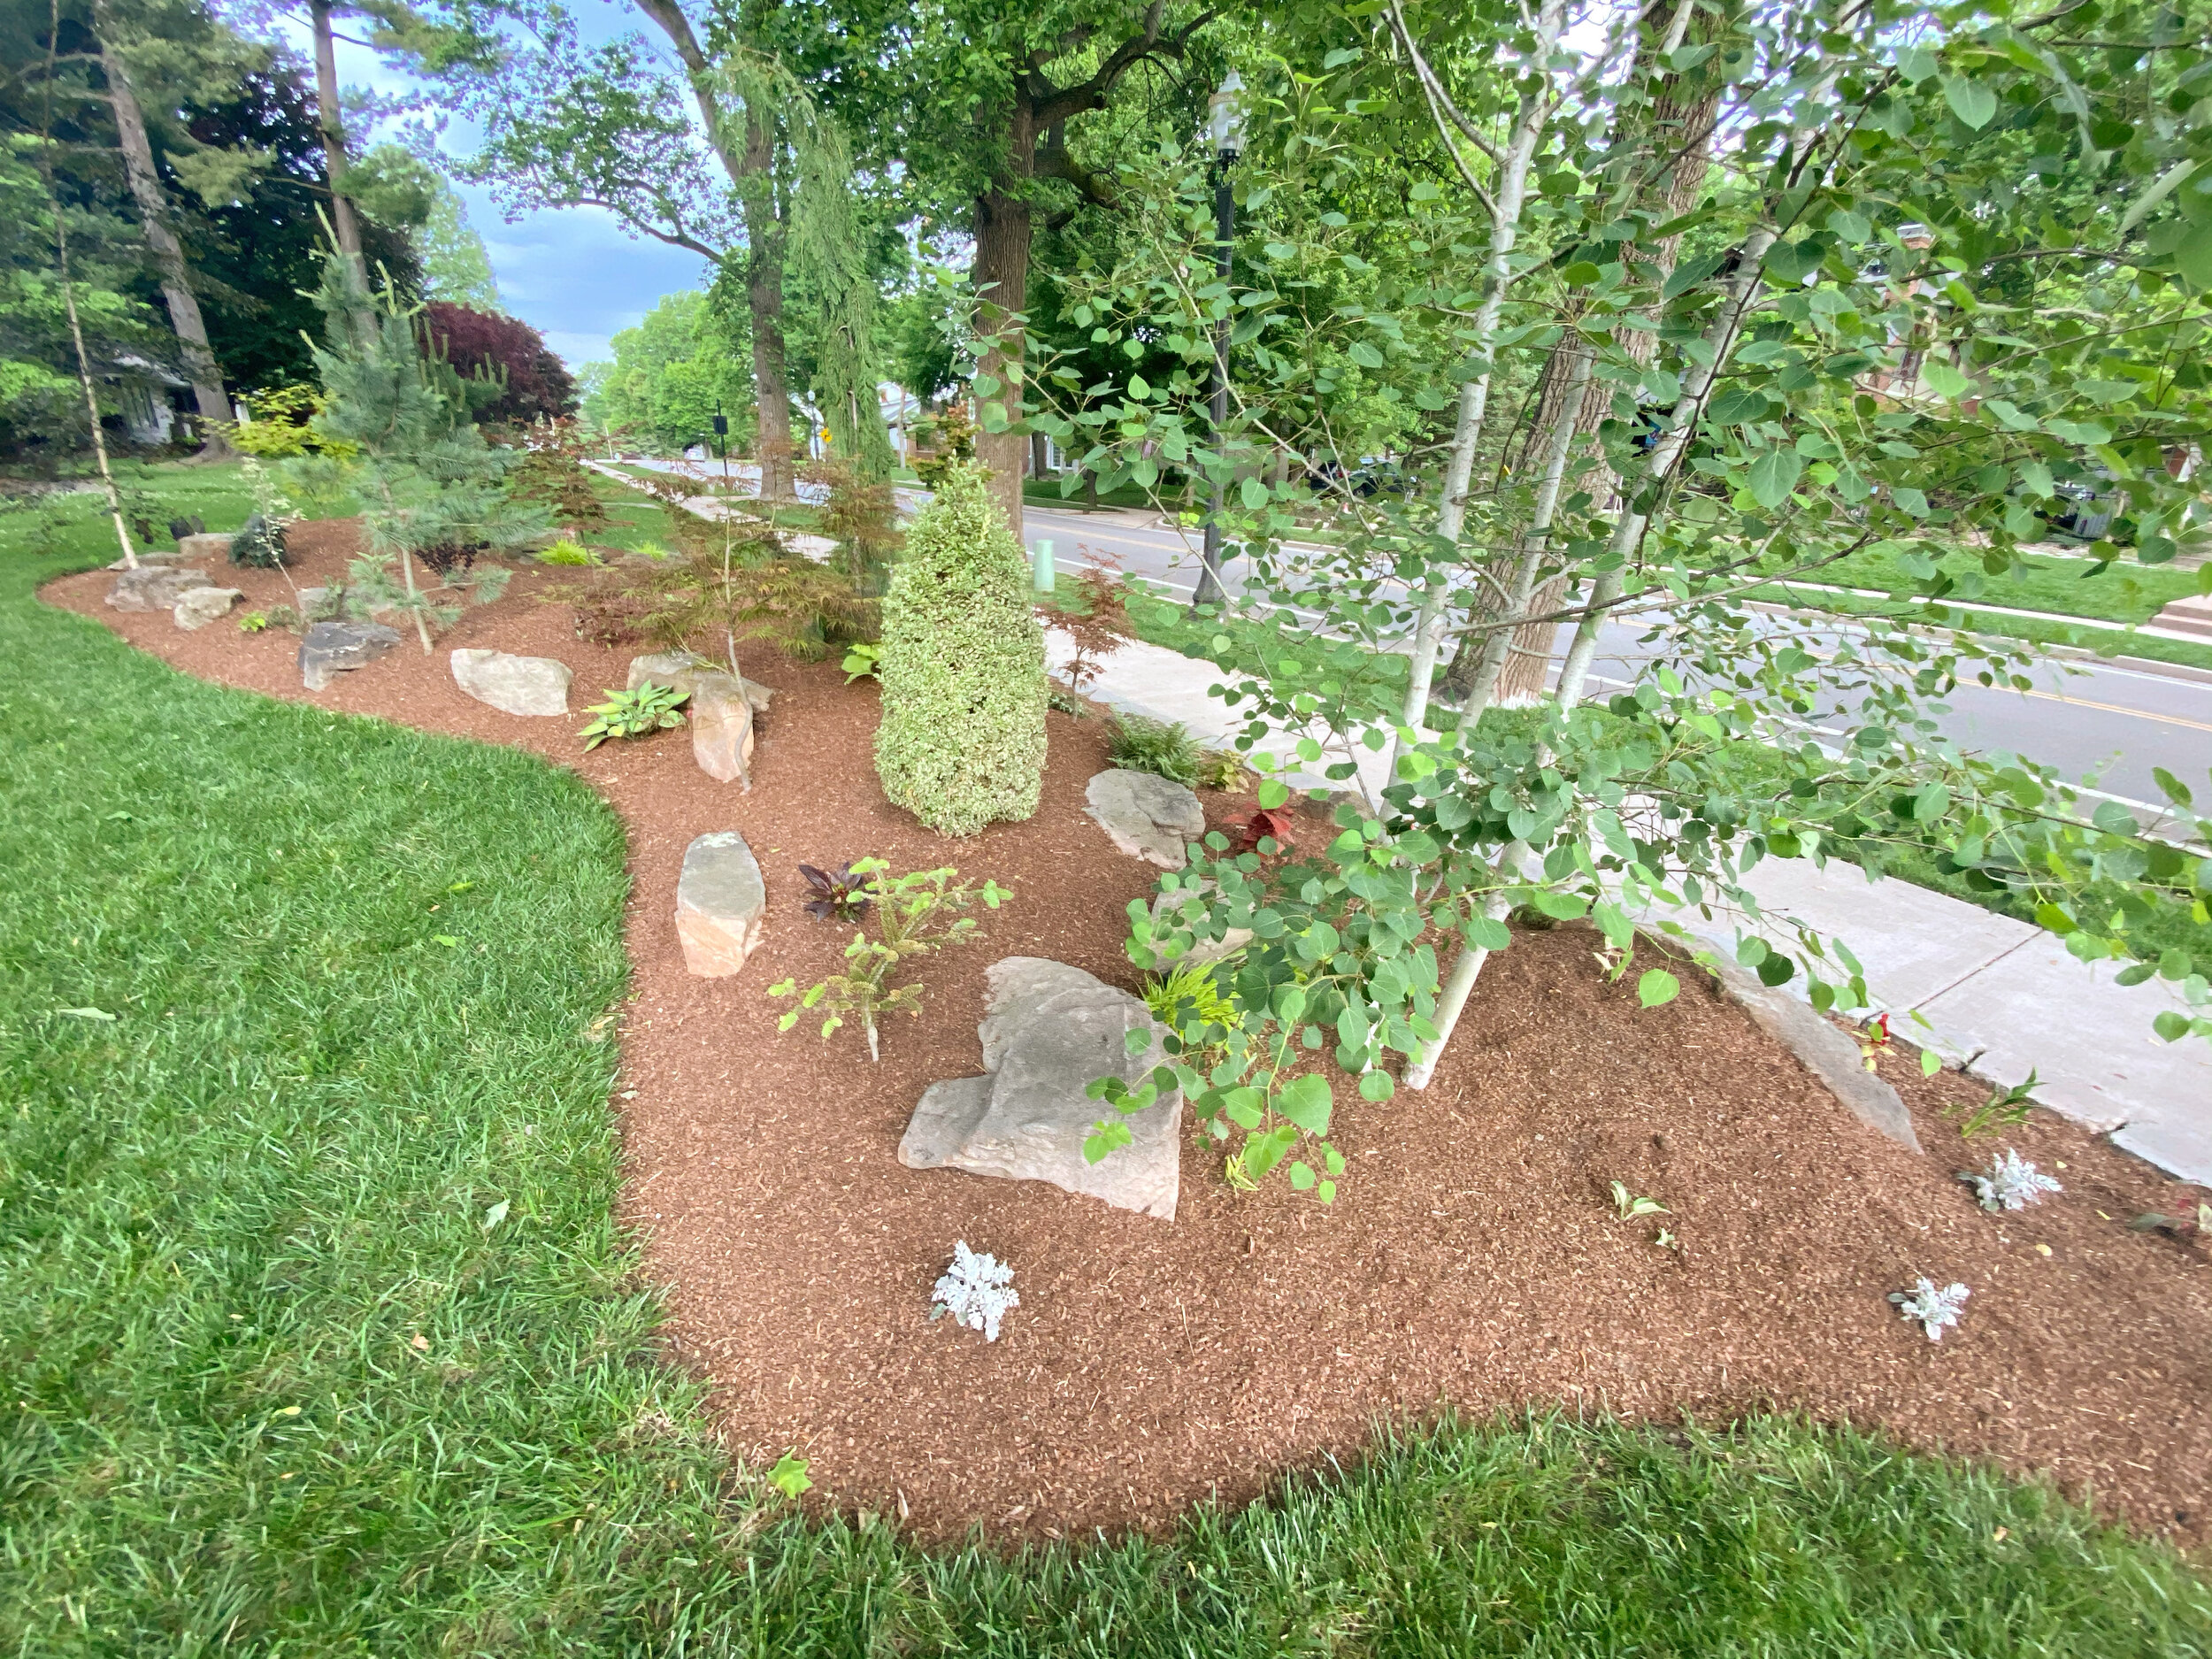 Second House Landscaping In, St Louis Landscaping Companies